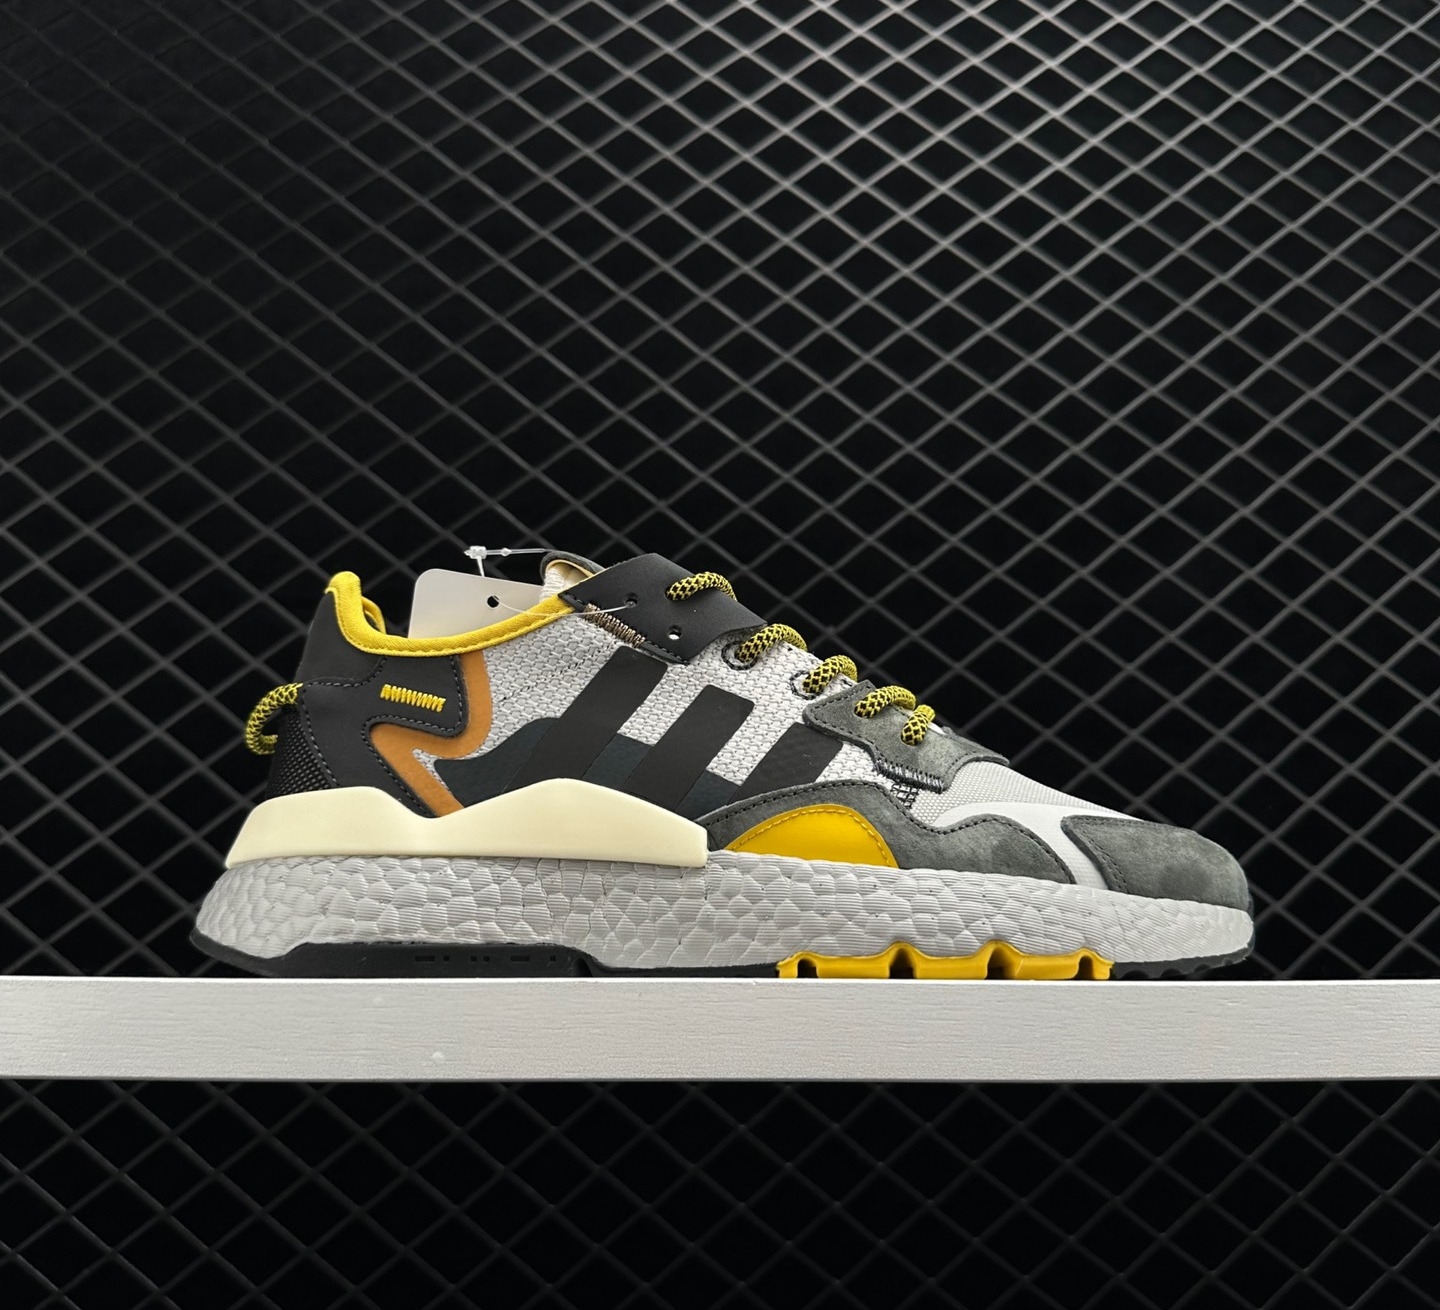 Adidas Originals Nite Jogger Gray Yellow GY0019 - Unique Style and Comfort